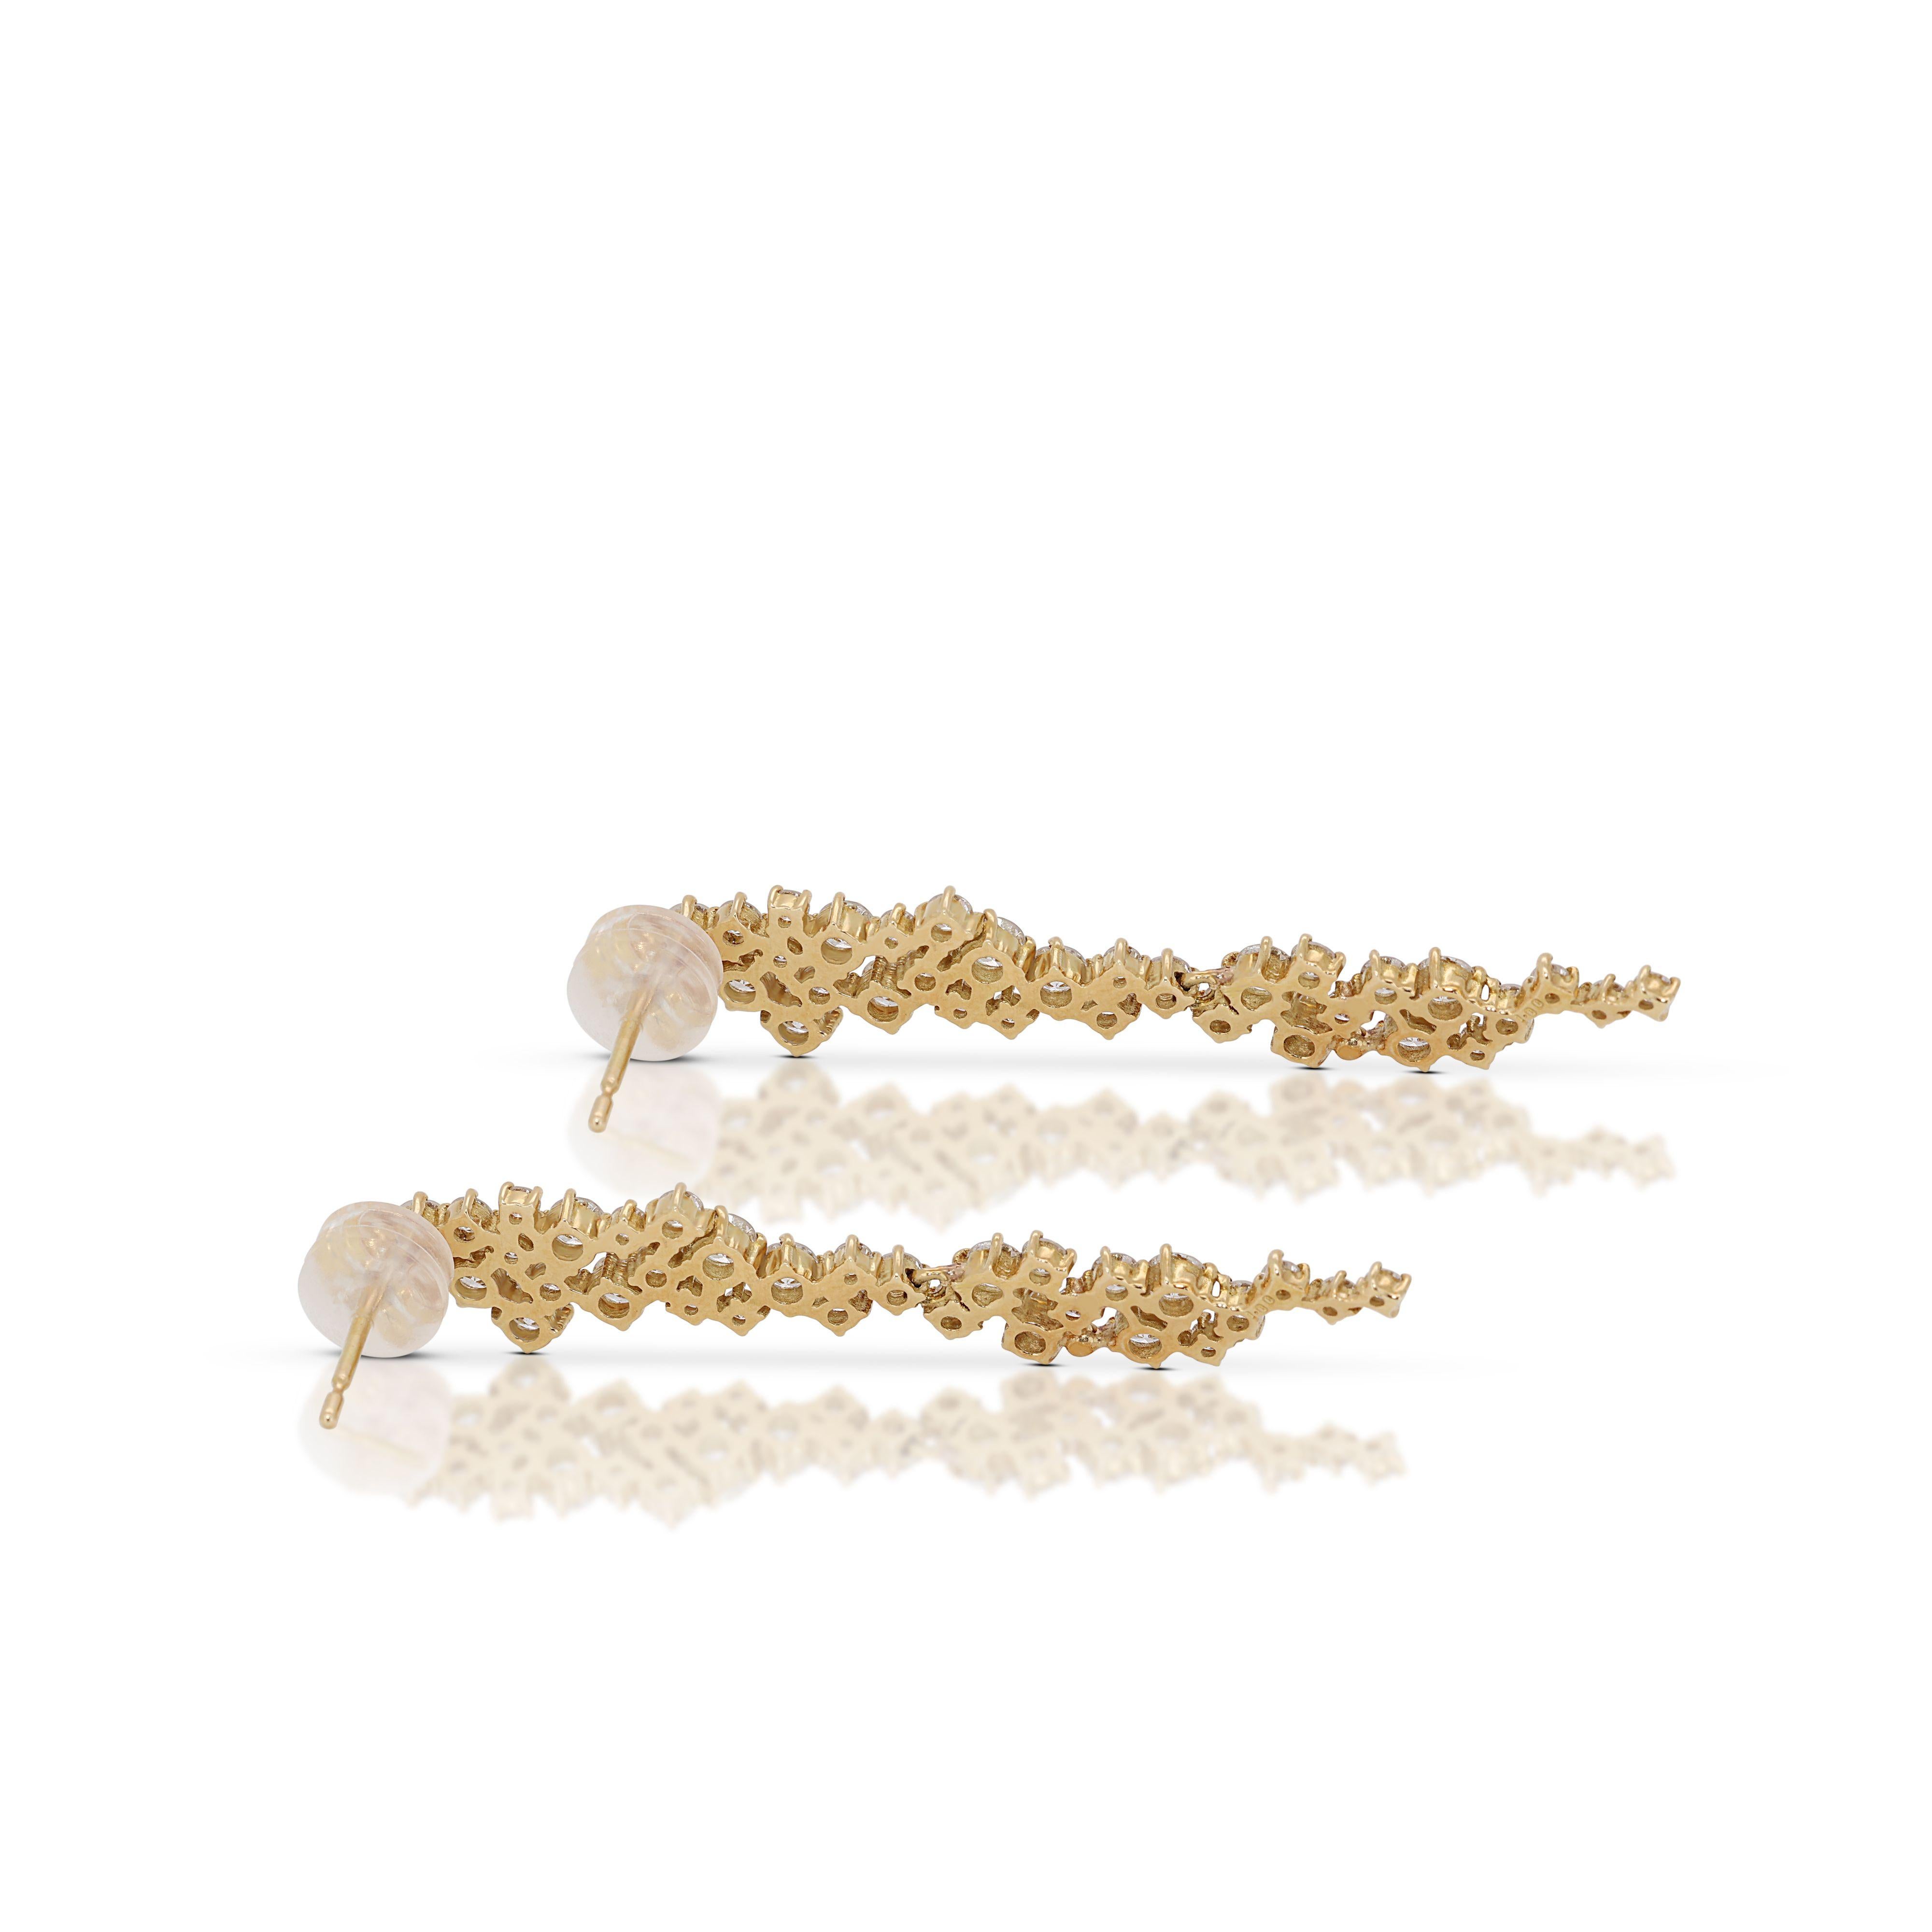 Elegant 18k Yellow Gold Drop Earrings with 1.60 Natural Round Diamonds, NGI Cert For Sale 1